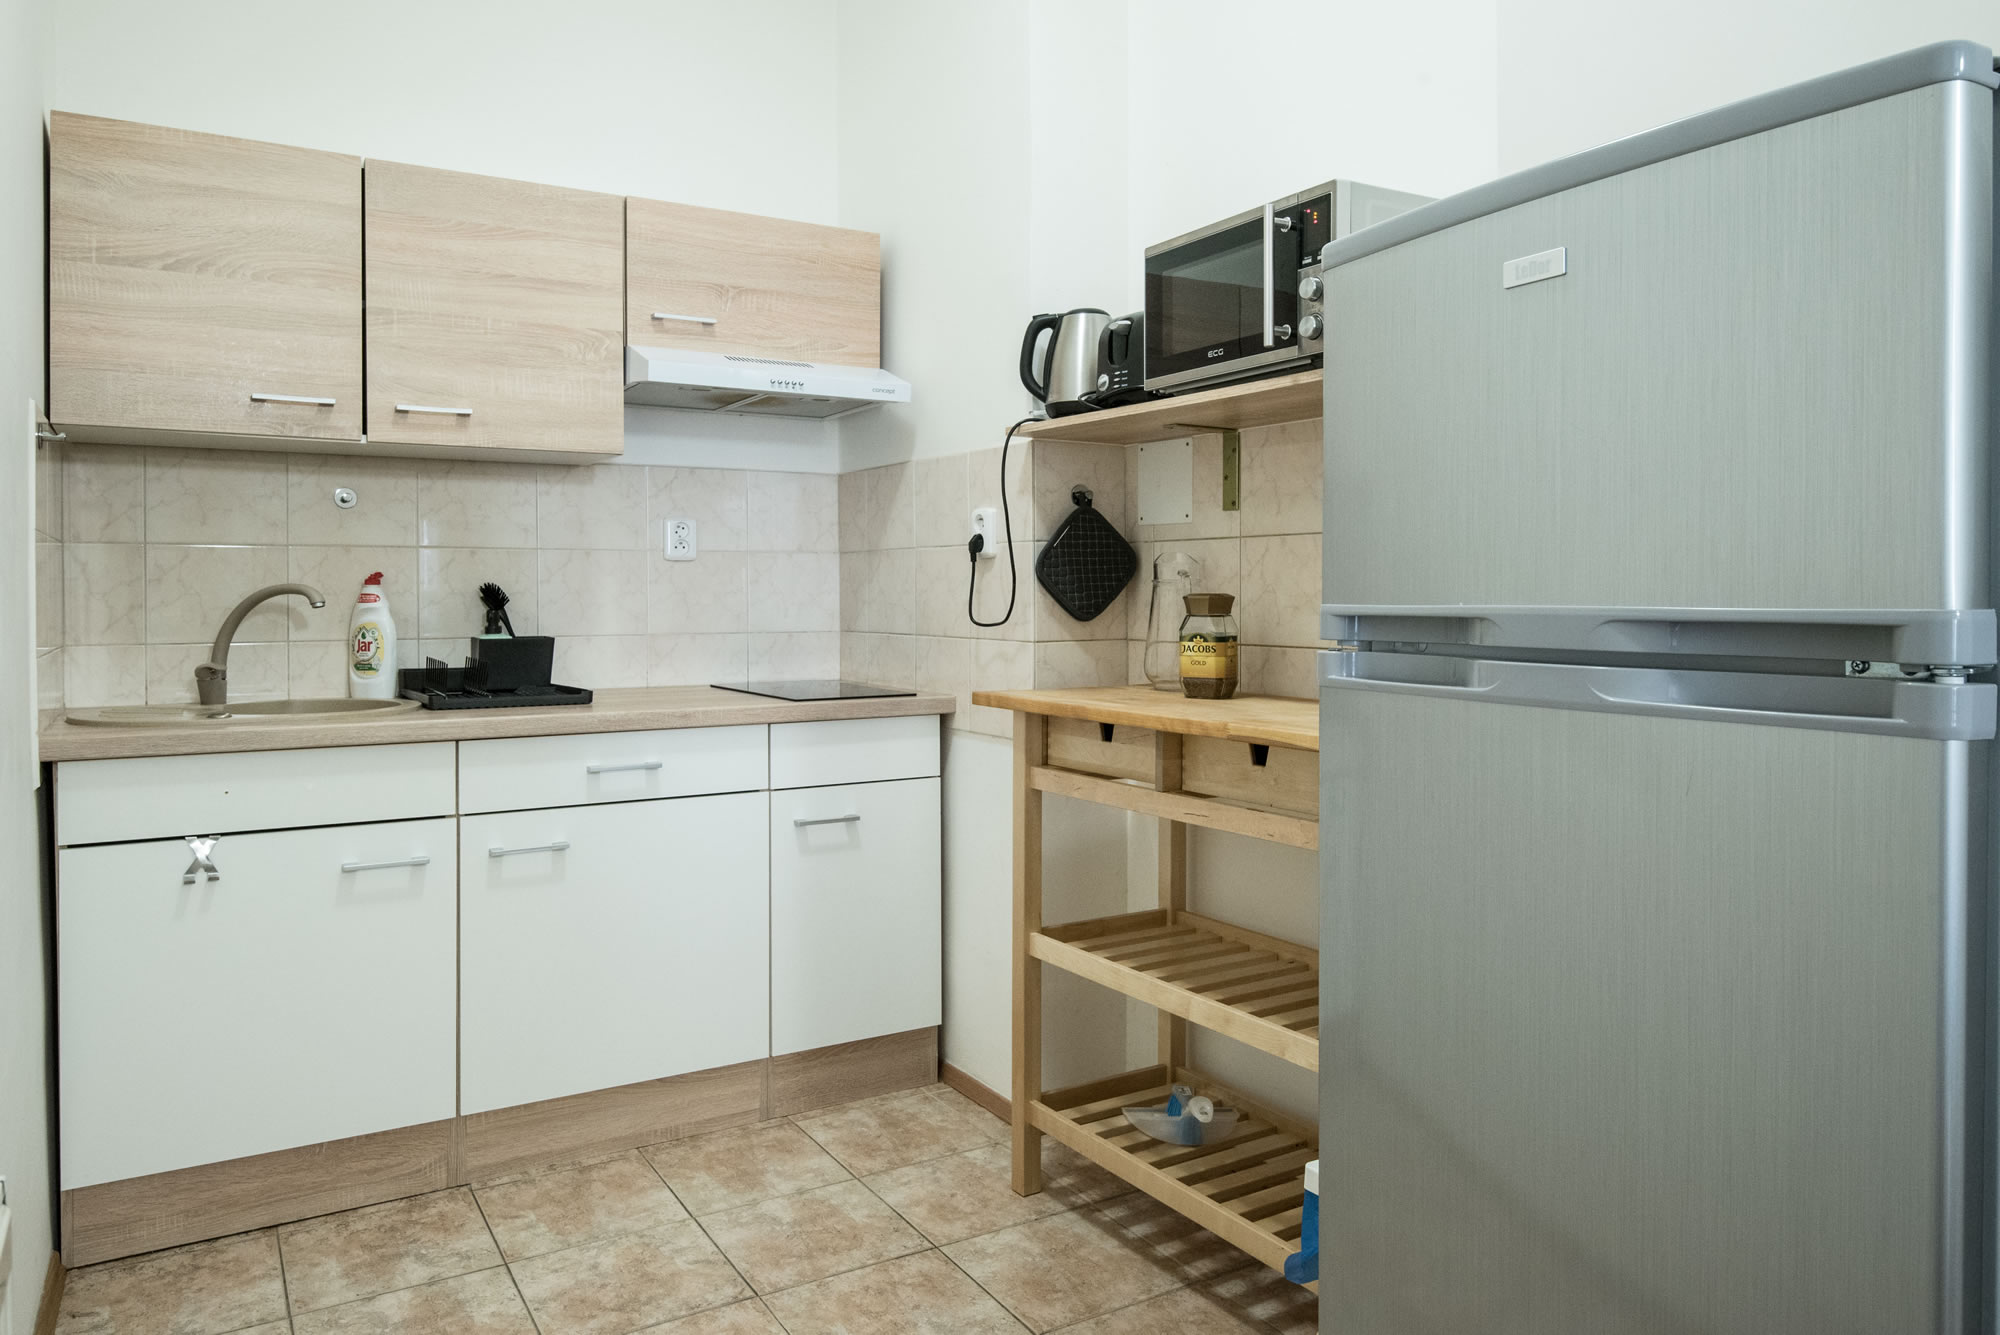 Kitchen with microwave and a fridge. Tiles are on the floor